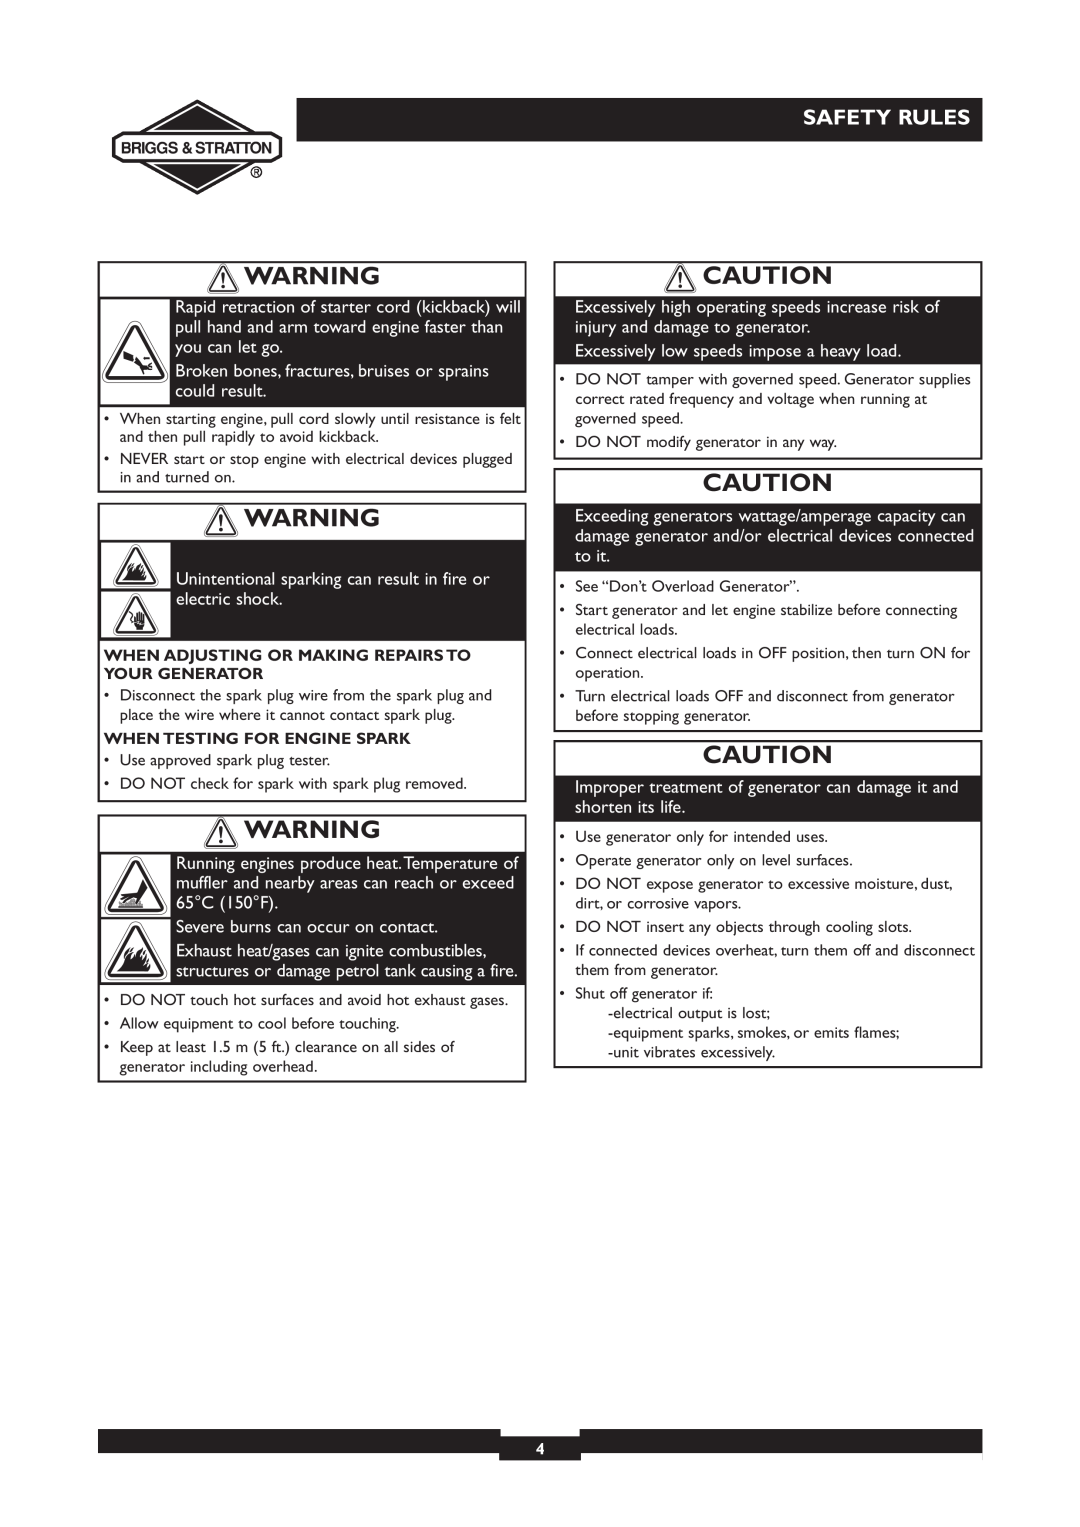 Briggs & Stratton 30231 manual Safety Rules, Severe burns can occur on contact 